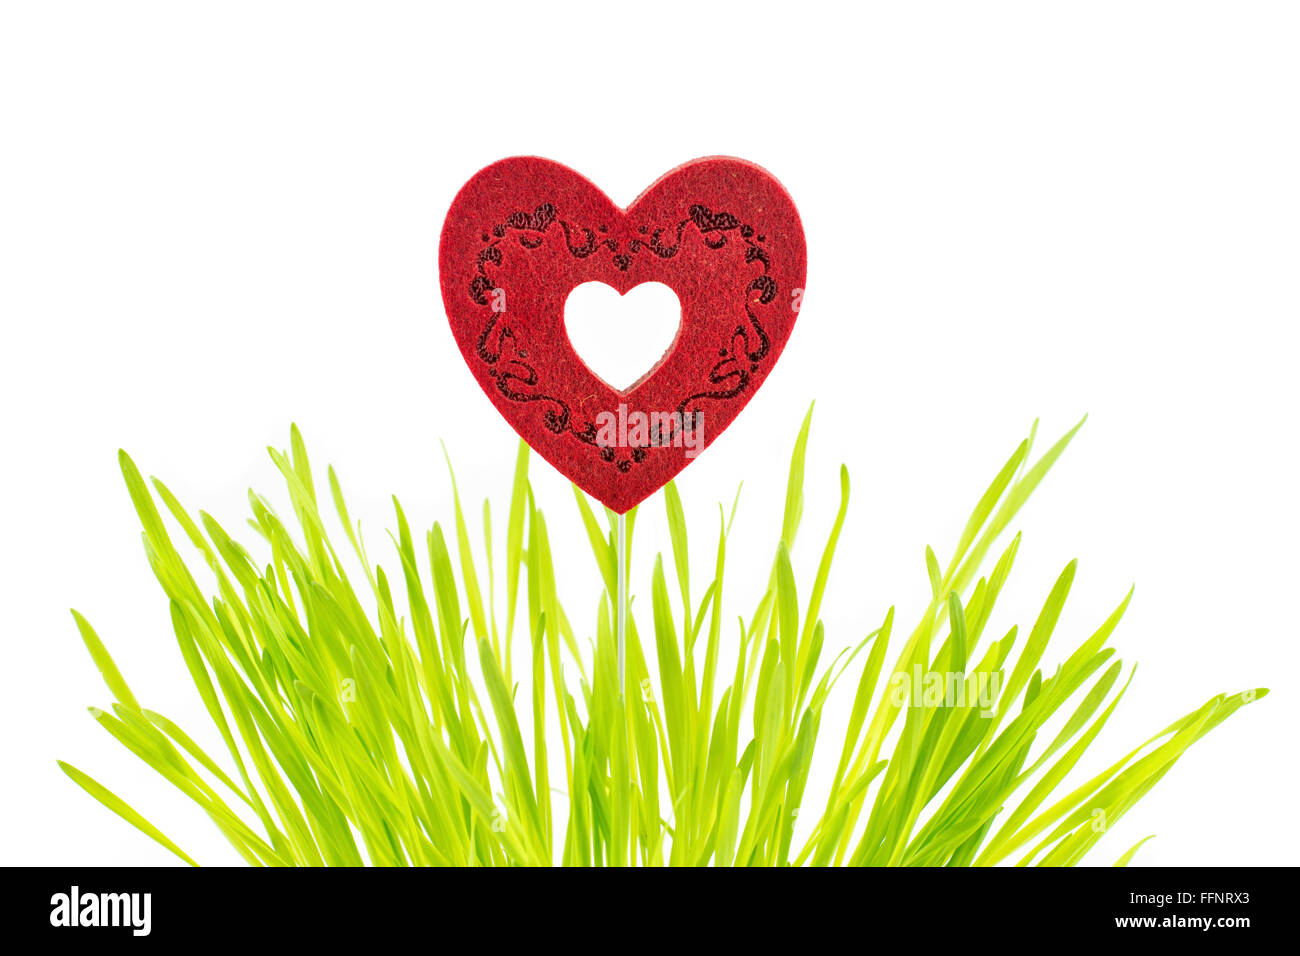 heart symbol above green raw leaves of wheat Stock Photo